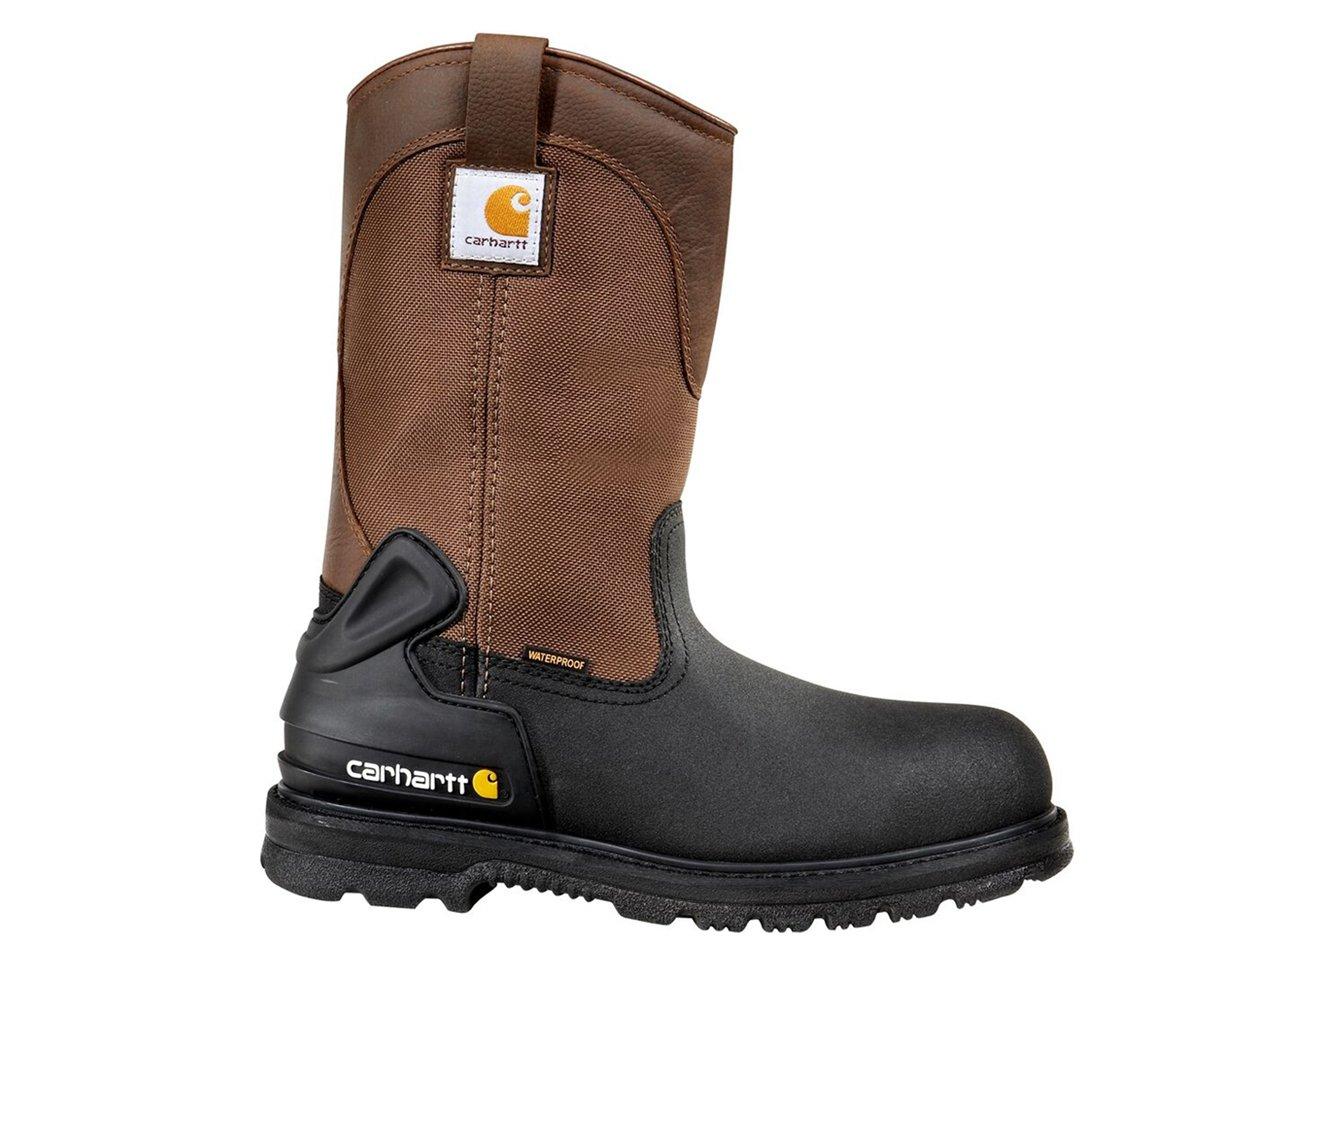 Men's Carhartt CMP1259 Insulated Steel Toe Pull-On Work Boots